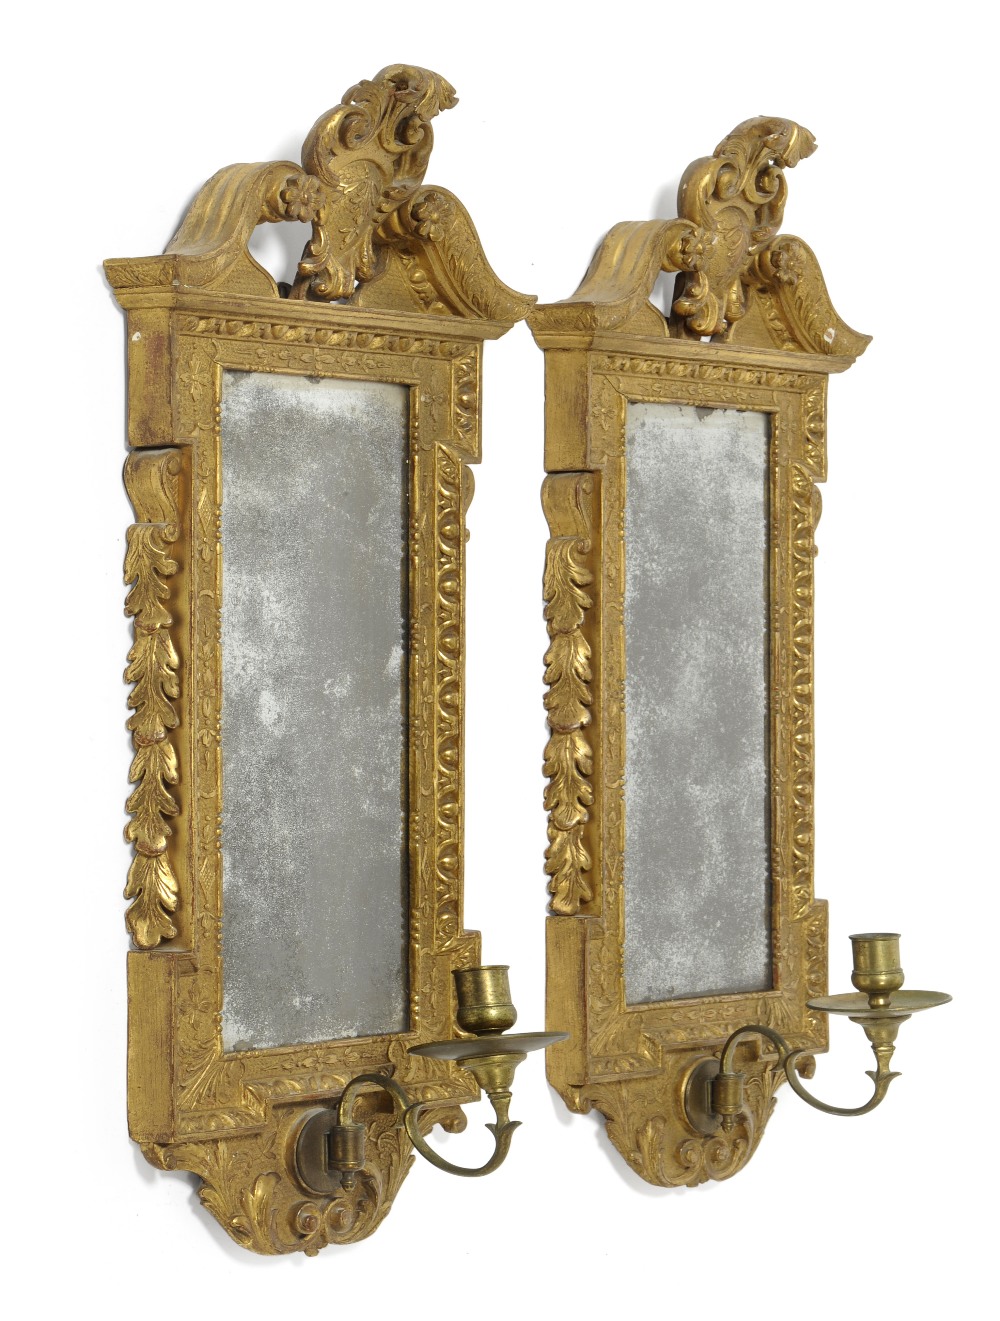 A Pair of Carved Giltwood and Gesso Girandoles, 18th century and later, with rectangular bevel